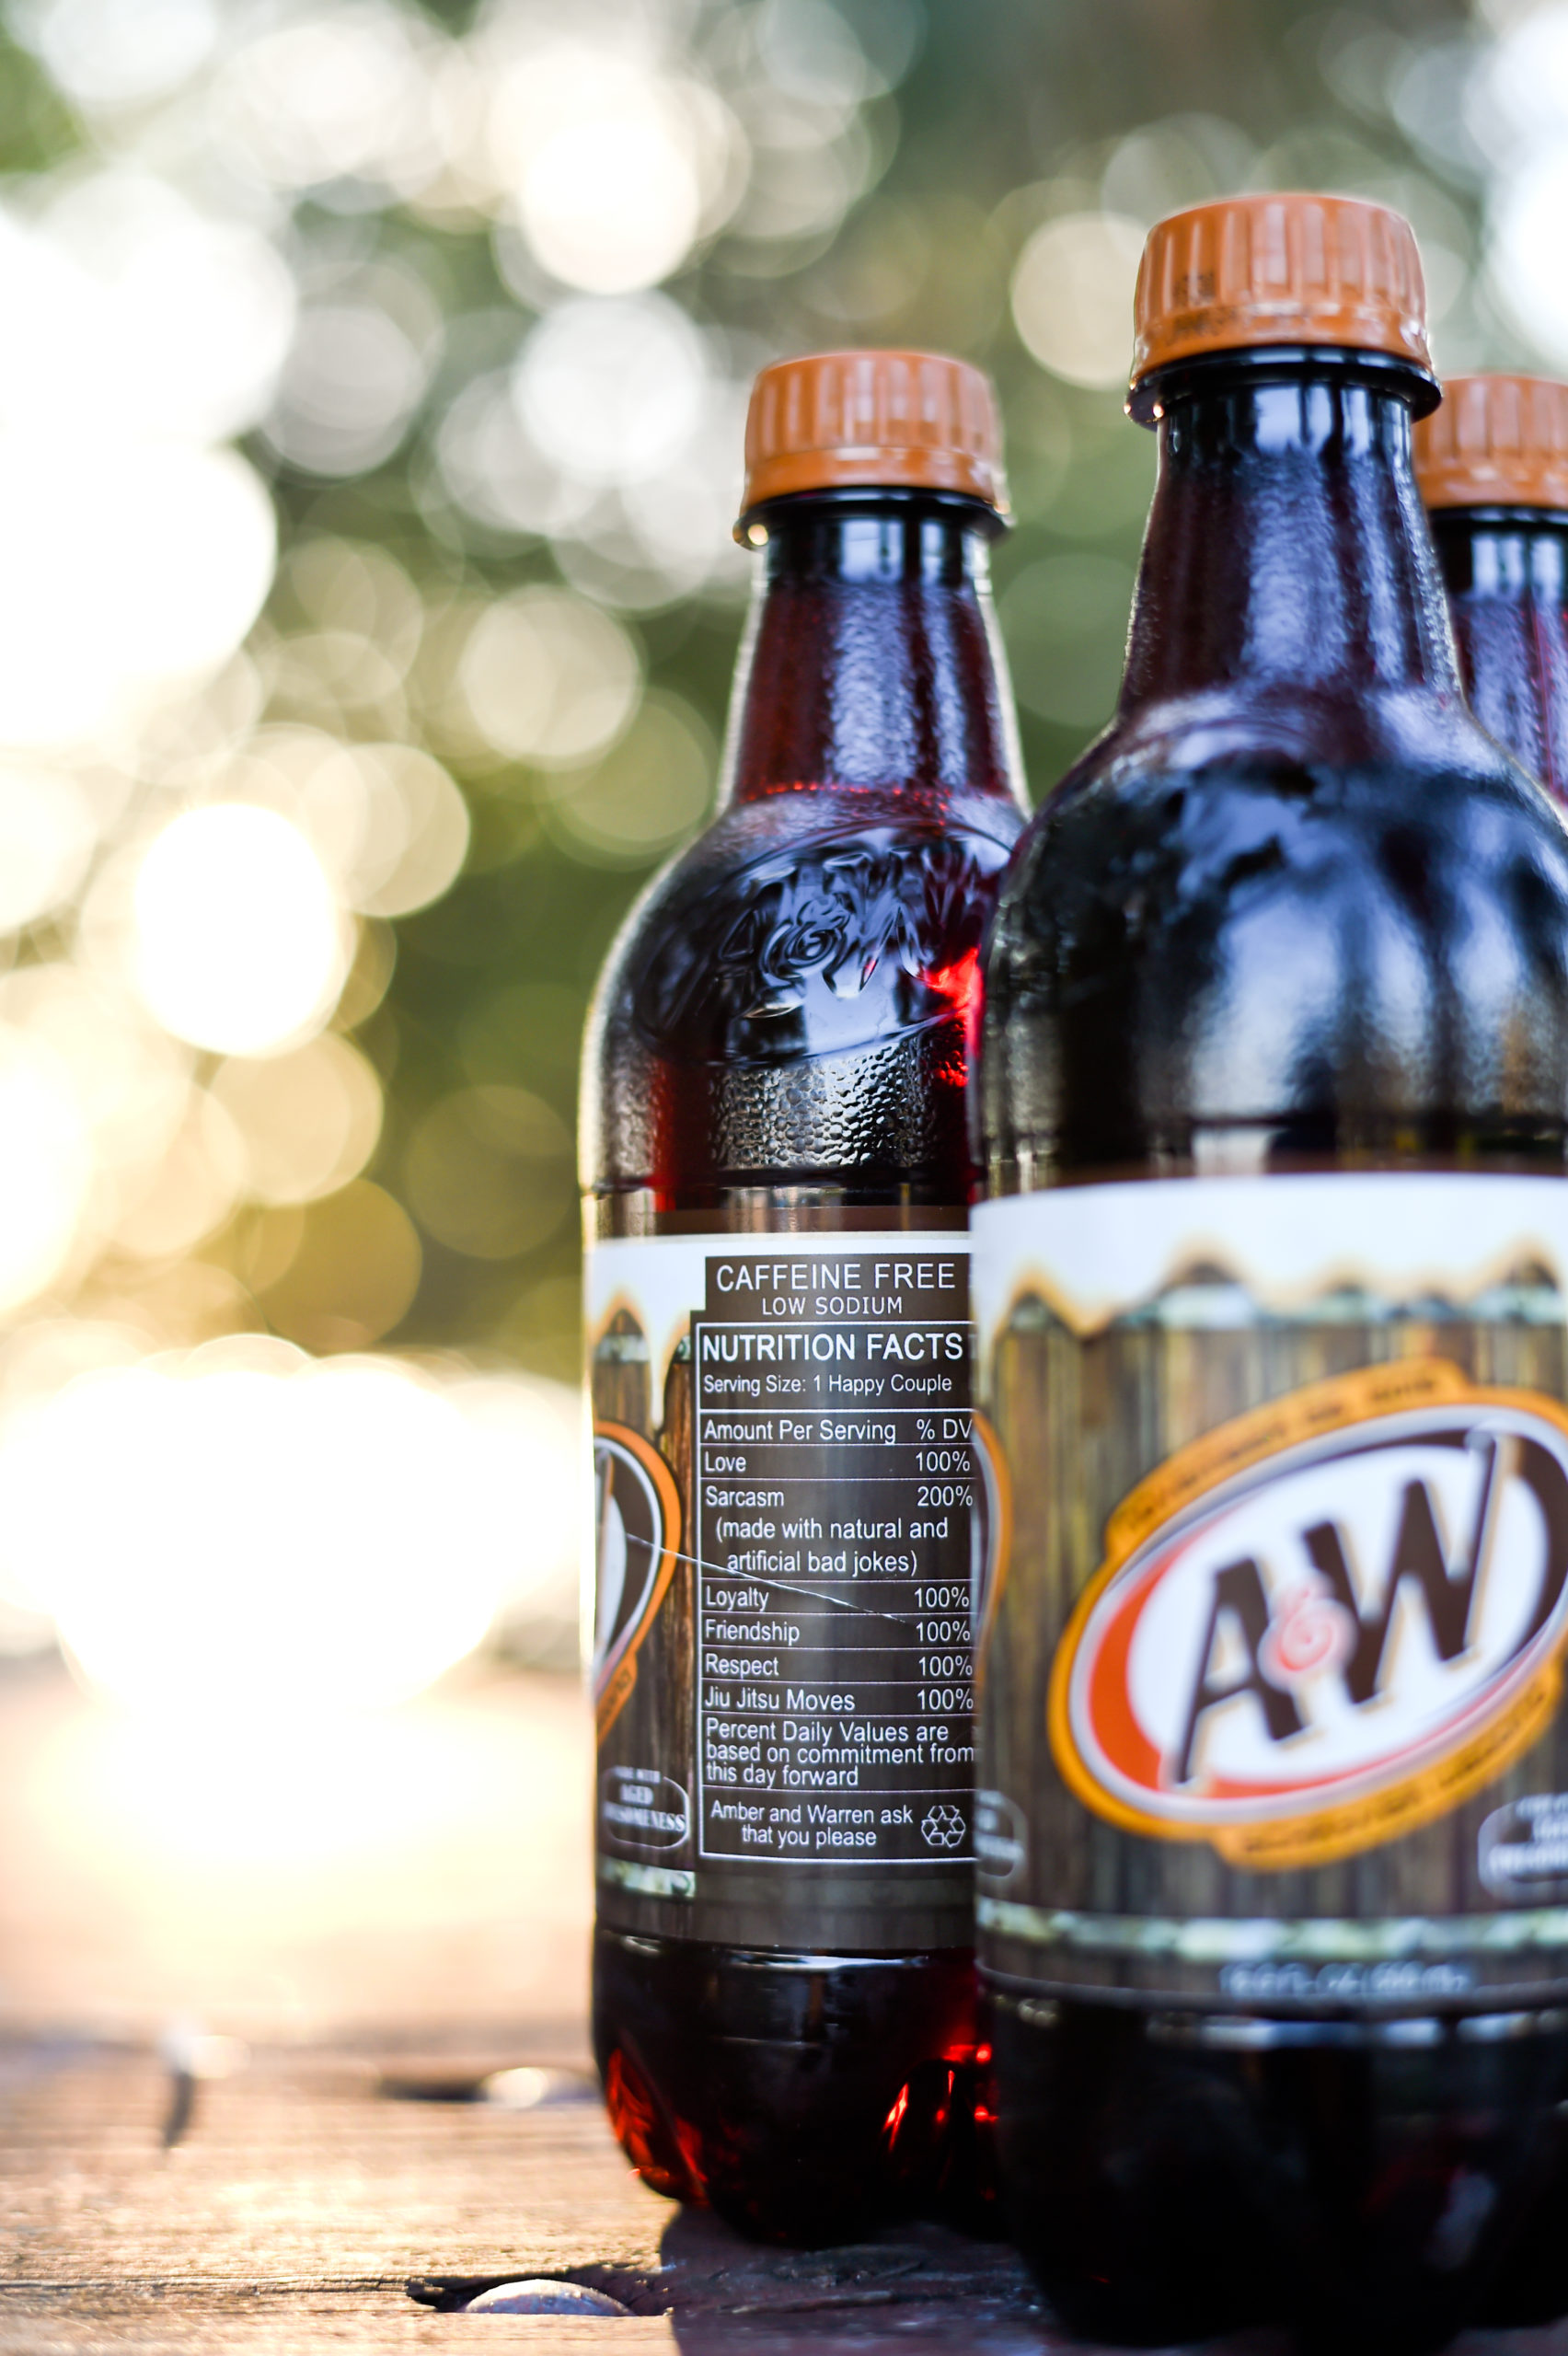 The wedding favors were custom labeled root beer bottles with the couple's information and a custom ingredient list